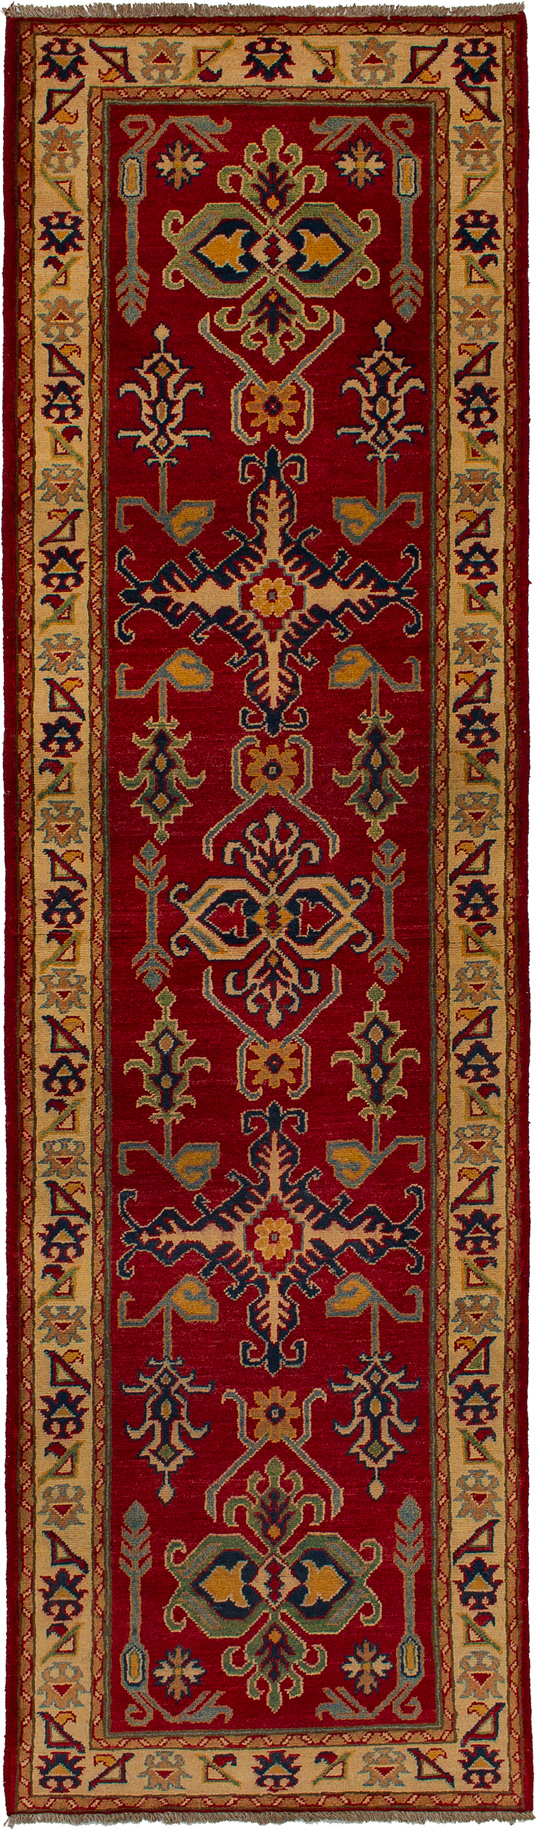 Hand-knotted Finest Gazni Red Wool Rug 2'8" x 9'6"  Size: 2'8" x 9'6"  